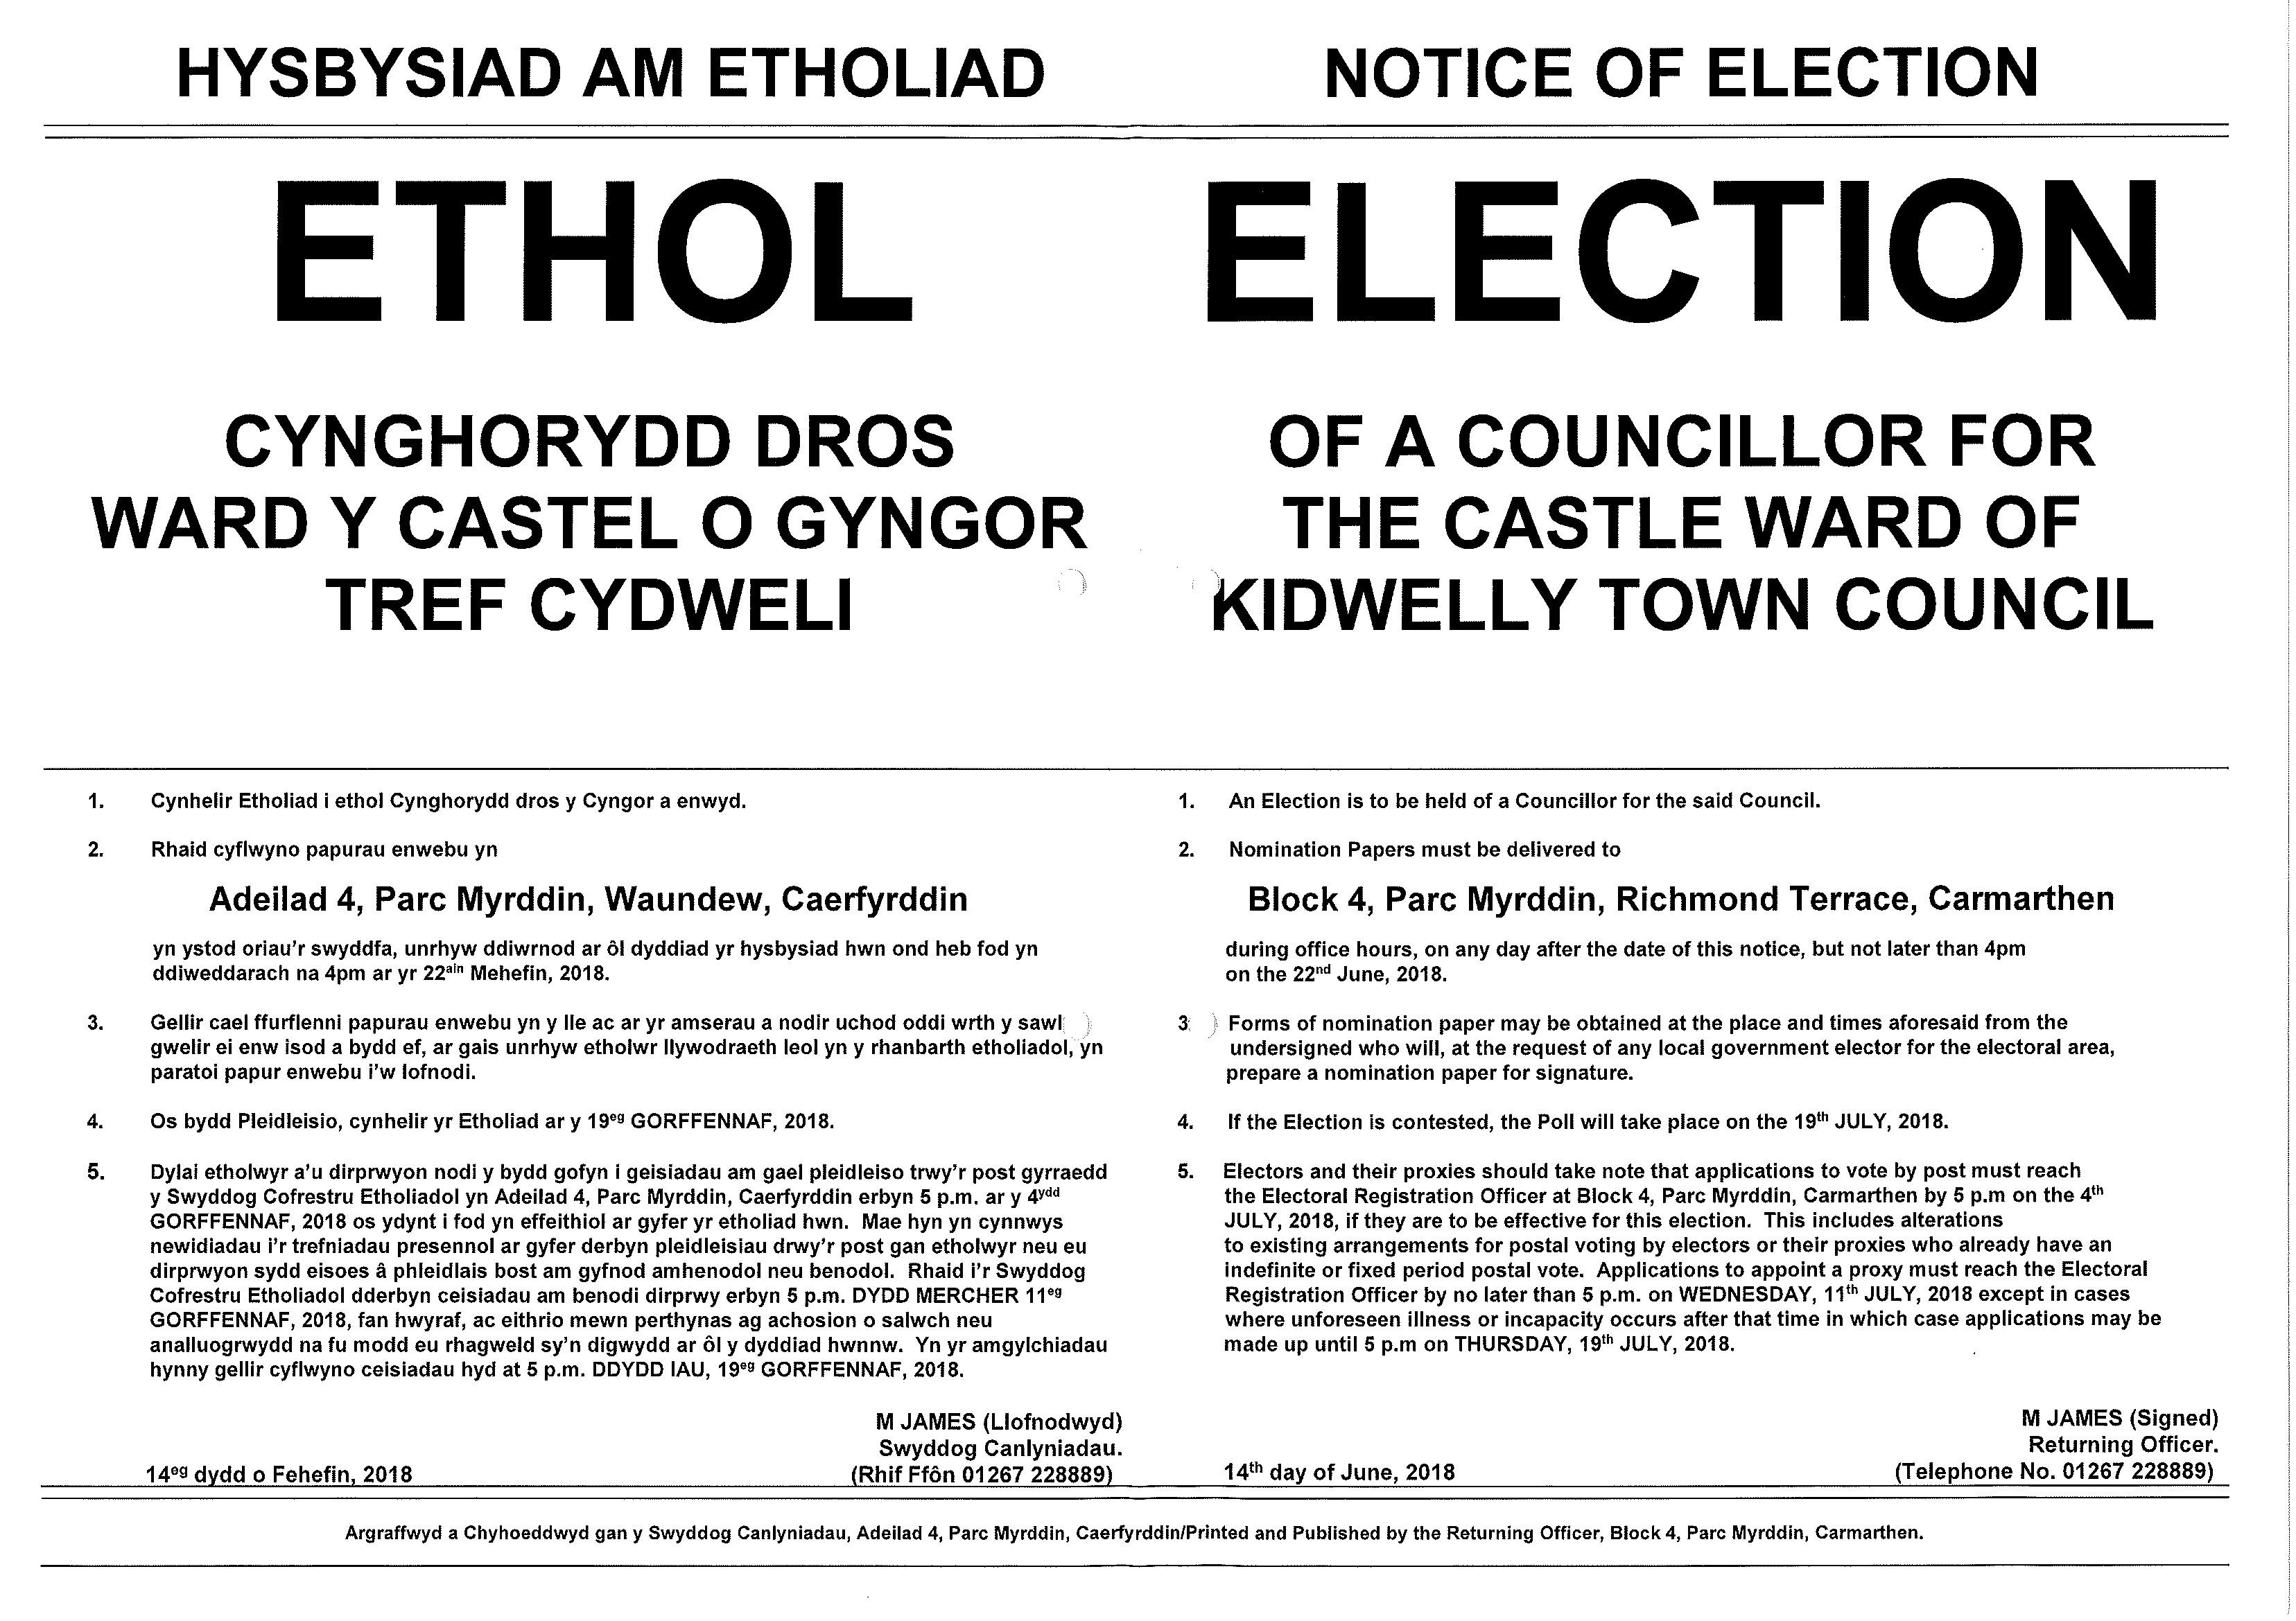 Notice of Election of a Councillor in Castle Ward